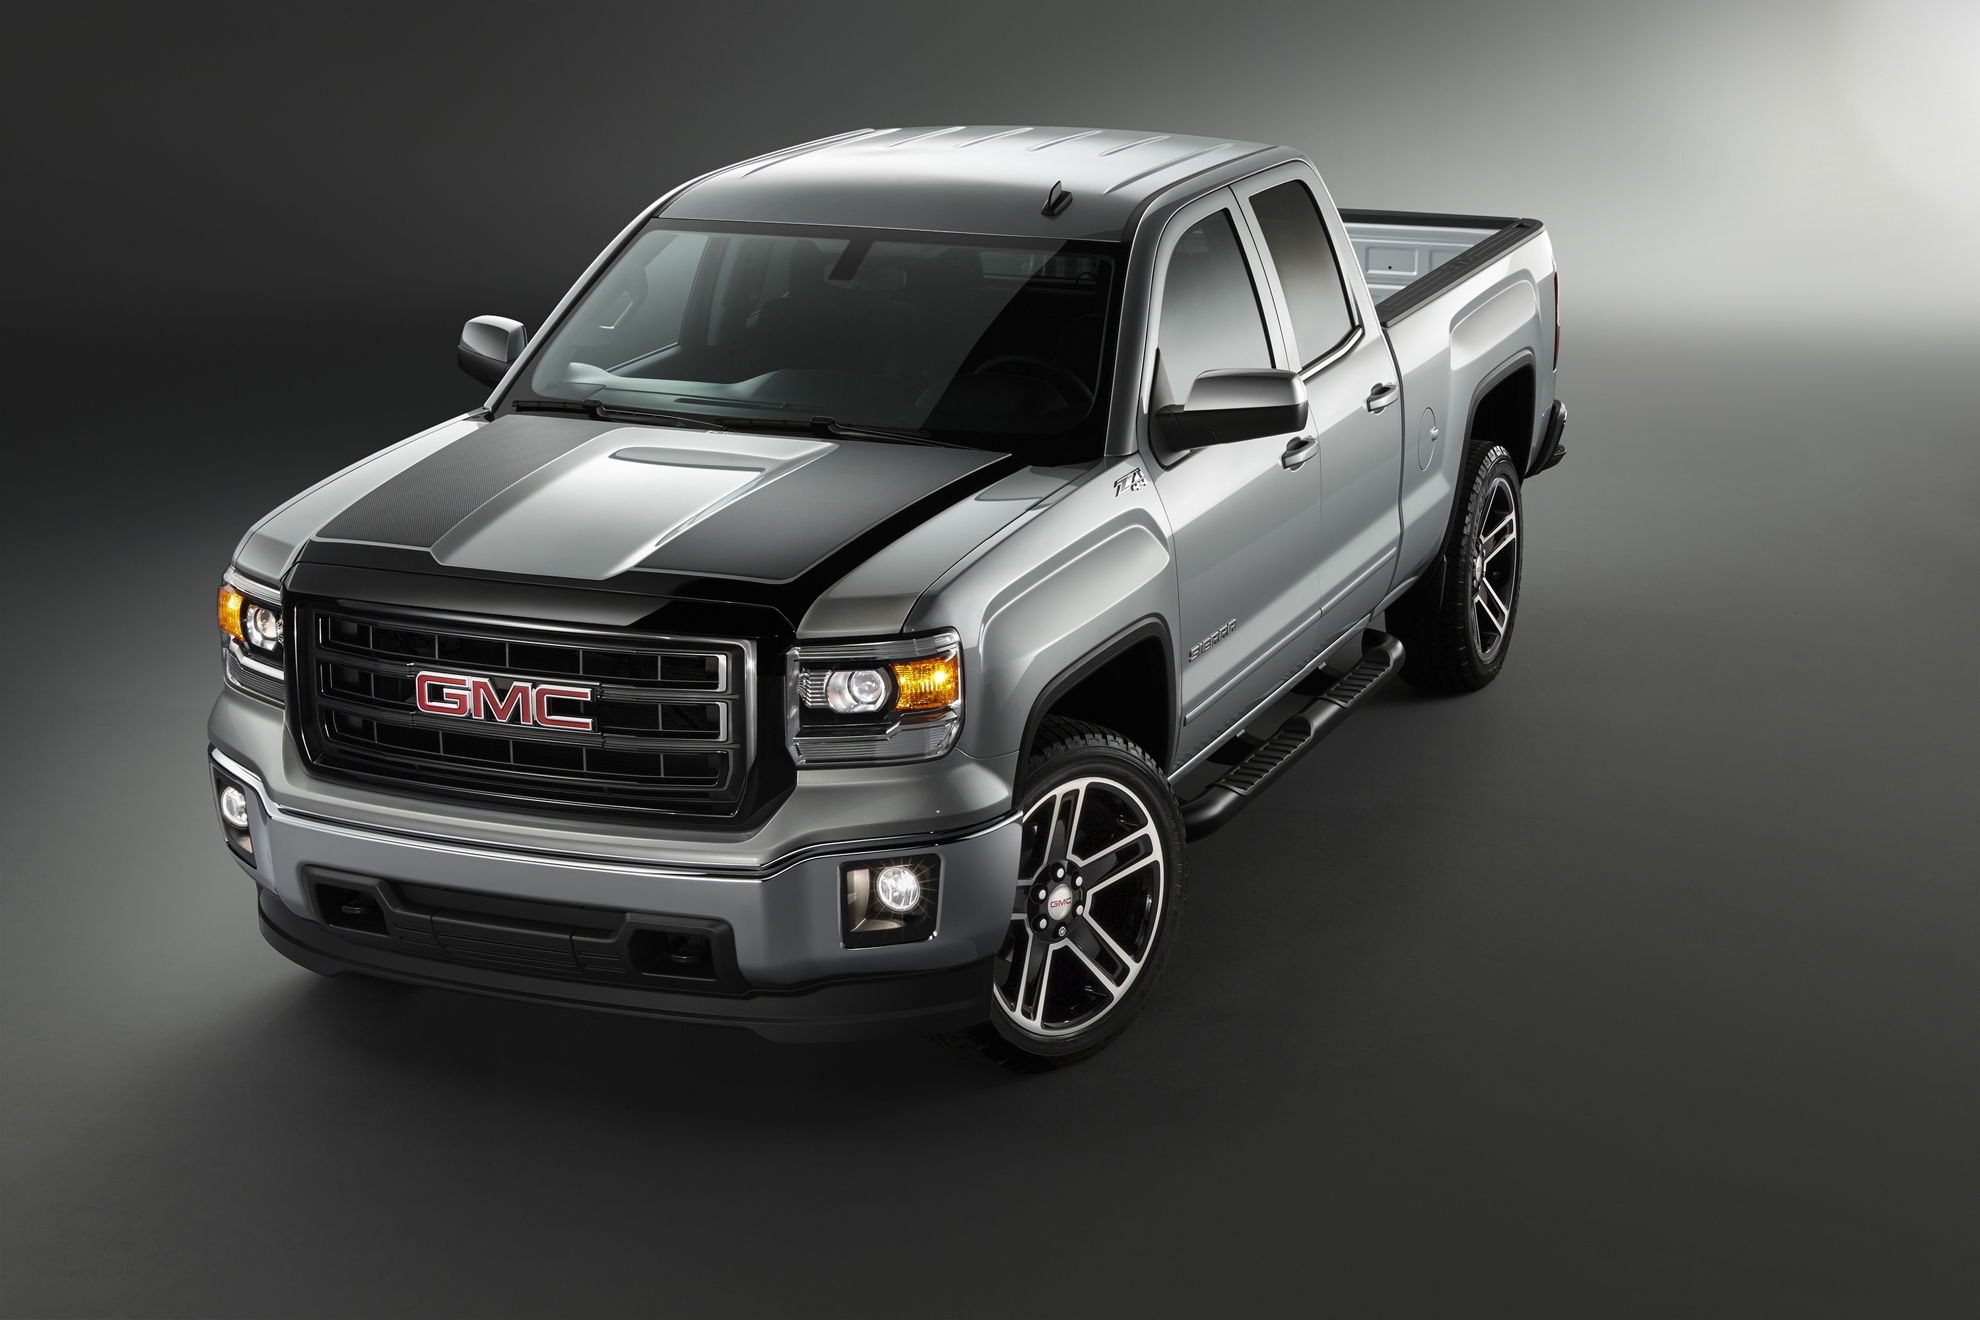 2015 GMC Sierra Carbon Editions Add Sporty Looks, Substance